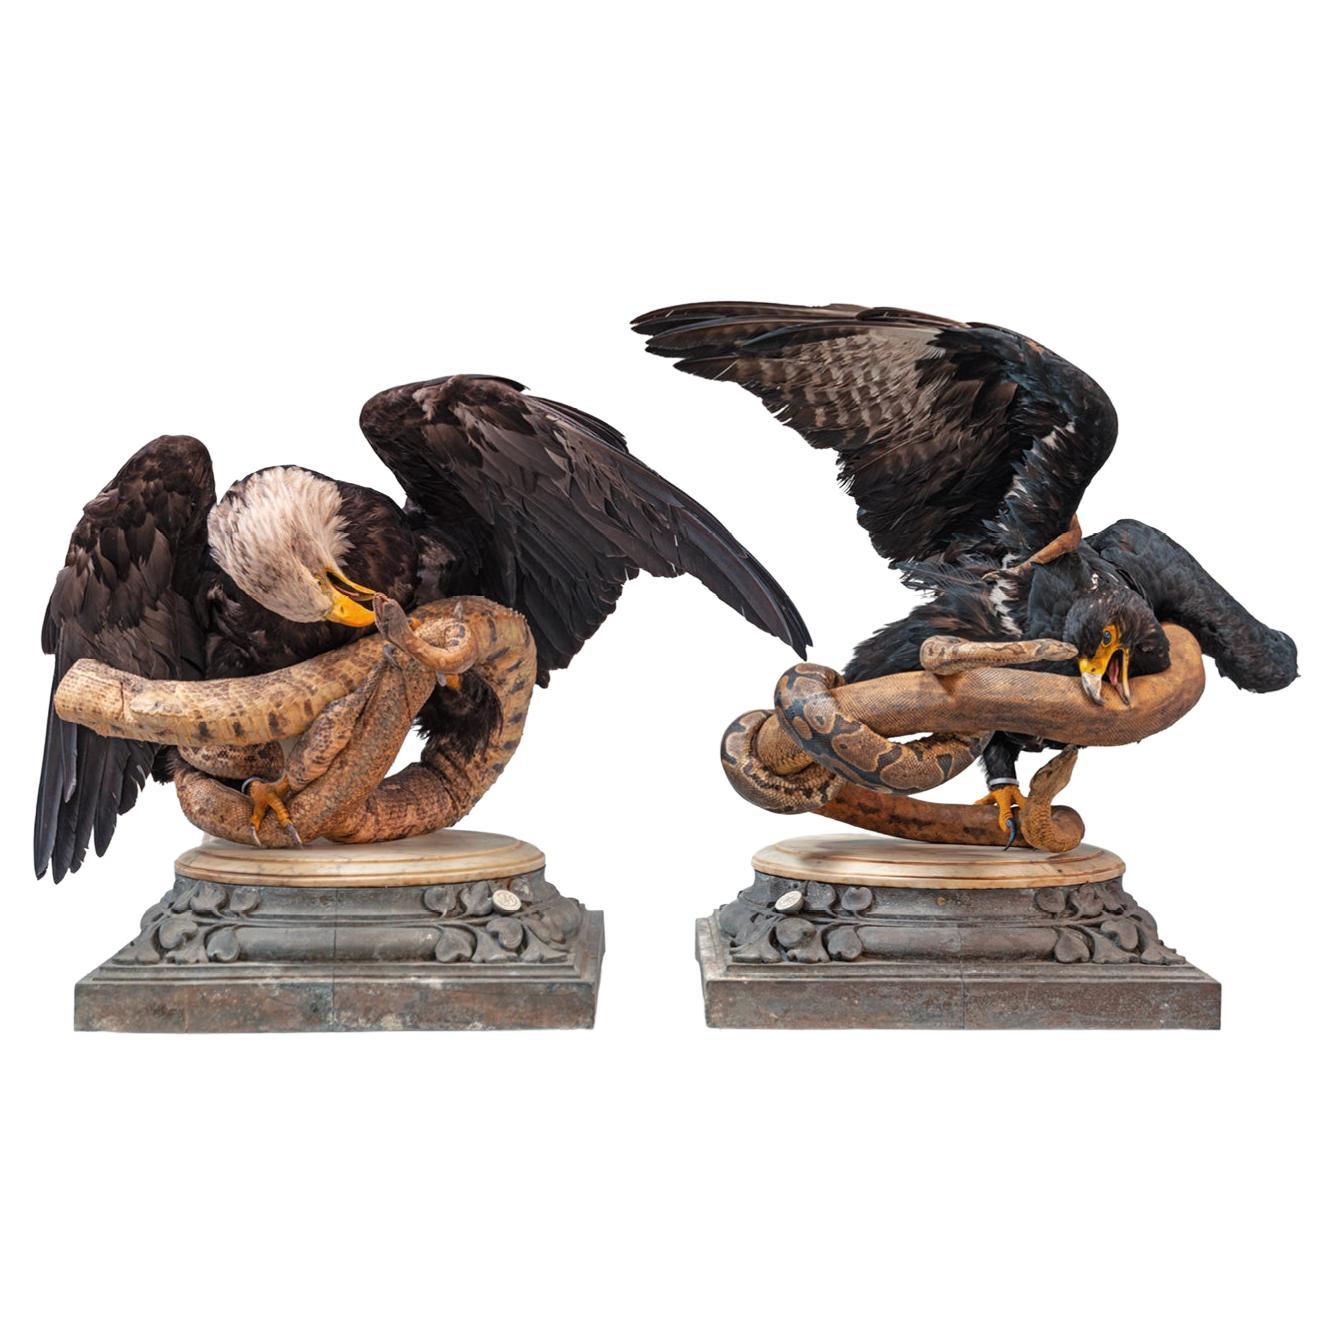 Fine Taxidermy Eagles and Snakes Duo by Sinke & Van Tongeren